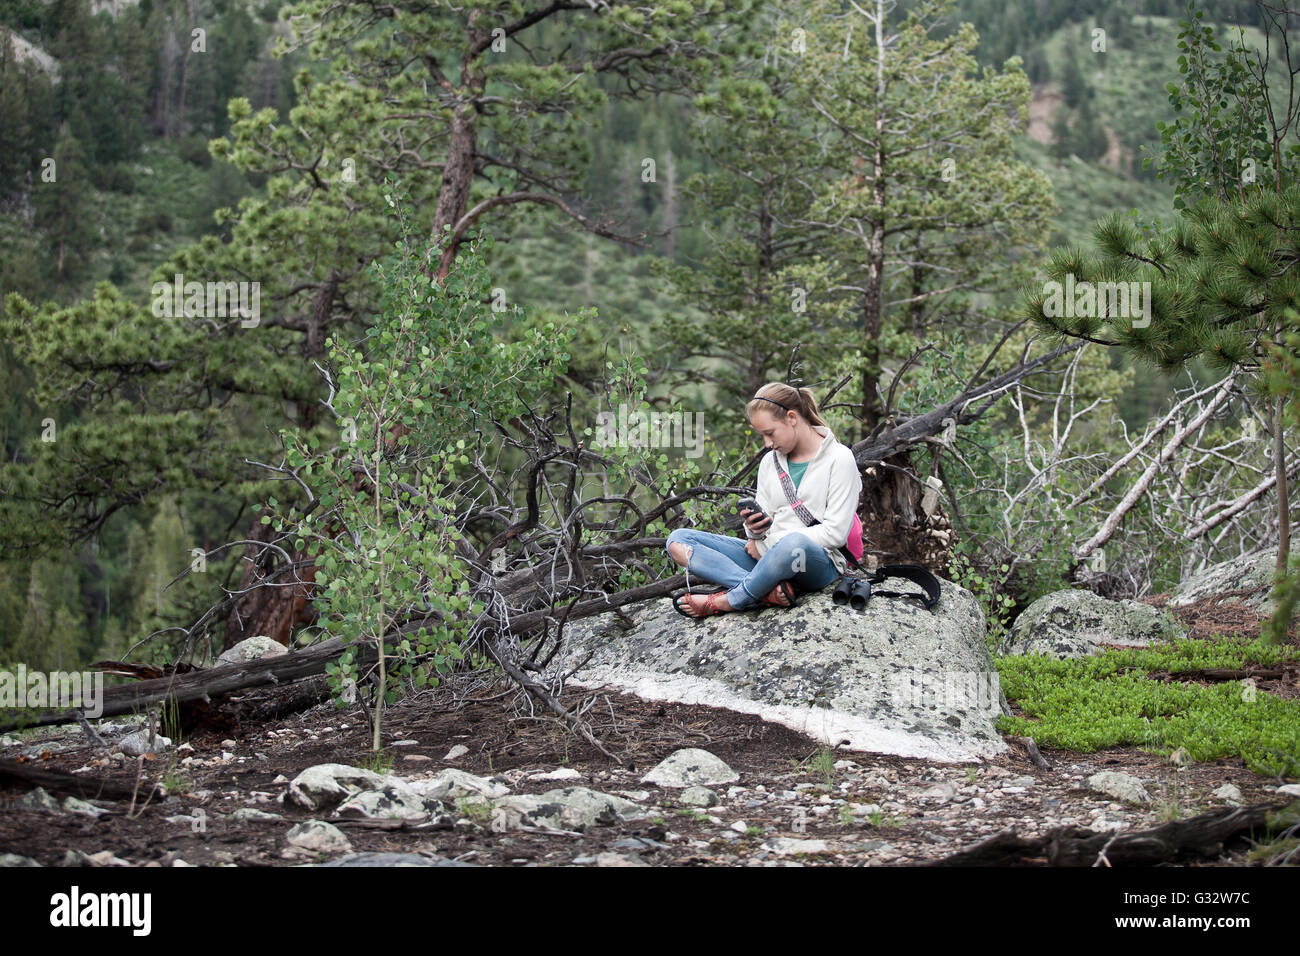 Girl sitting in forest text messaging, Colorado, United States Stock Photo